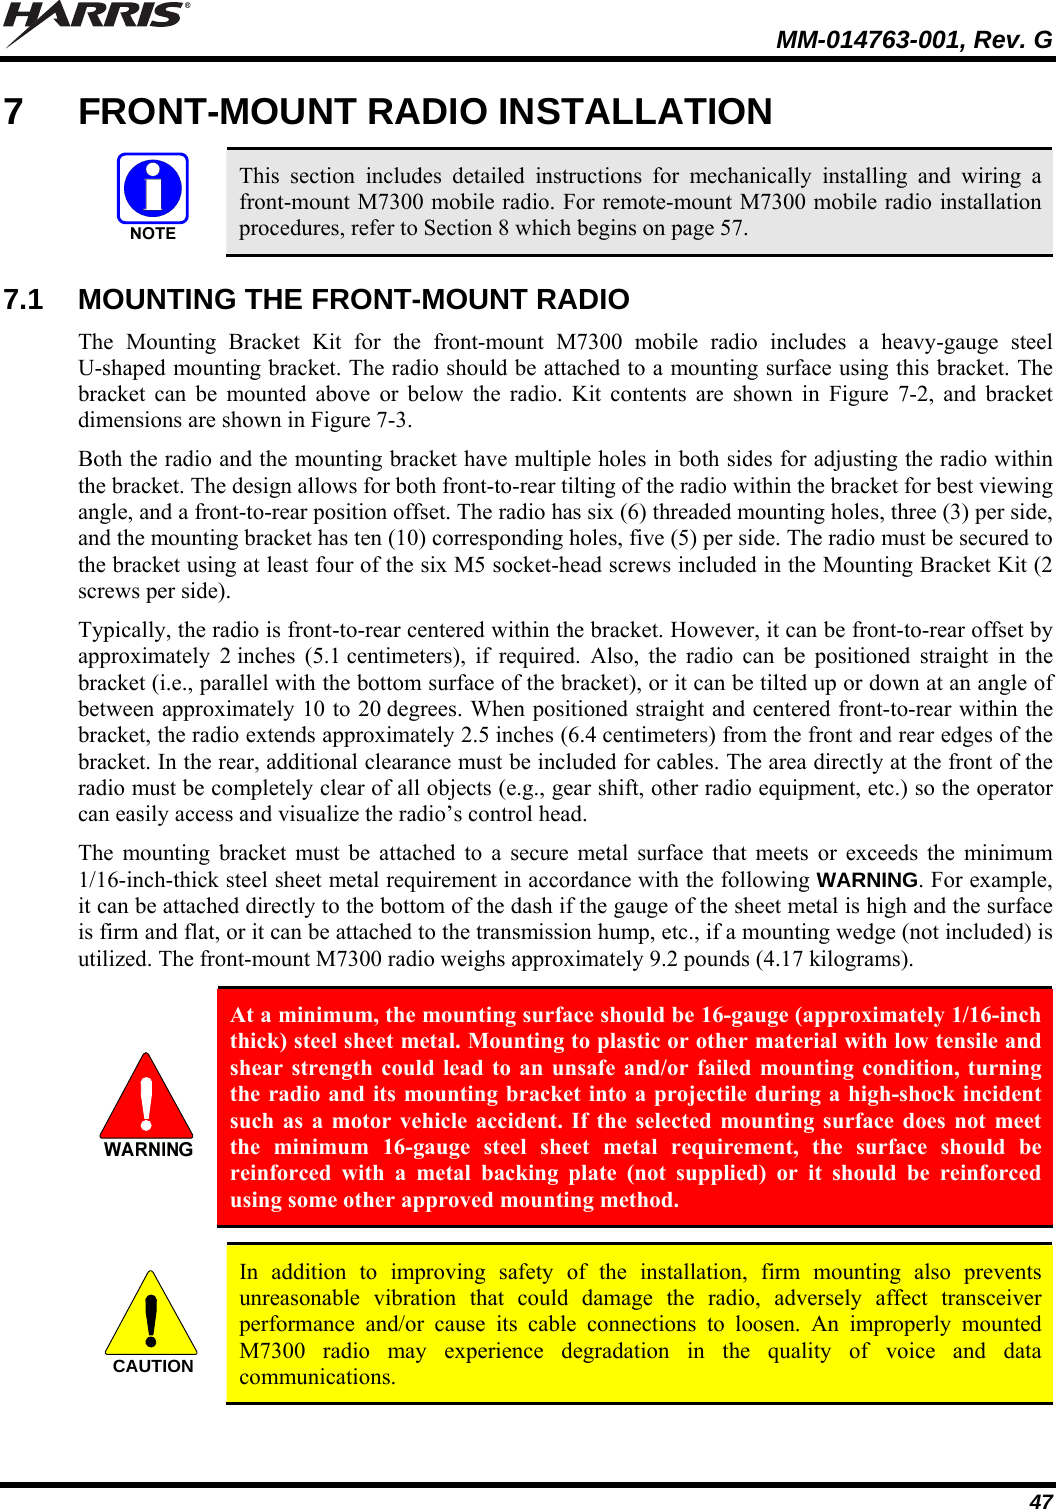   MM-014763-001, Rev. G 47 7  FRONT-MOUNT RADIO INSTALLATION   This section includes detailed instructions for mechanically installing and wiring a front-mount M7300 mobile radio. For remote-mount M7300 mobile radio installation procedures, refer to Section 8 which begins on page 57.  7.1  MOUNTING THE FRONT-MOUNT RADIO The Mounting Bracket Kit for the front-mount M7300 mobile radio includes a heavy-gauge steel U-shaped mounting bracket. The radio should be attached to a mounting surface using this bracket. The bracket can be mounted above or below the radio. Kit contents are shown in Figure 7-2, and bracket dimensions are shown in Figure 7-3. Both the radio and the mounting bracket have multiple holes in both sides for adjusting the radio within the bracket. The design allows for both front-to-rear tilting of the radio within the bracket for best viewing angle, and a front-to-rear position offset. The radio has six (6) threaded mounting holes, three (3) per side, and the mounting bracket has ten (10) corresponding holes, five (5) per side. The radio must be secured to the bracket using at least four of the six M5 socket-head screws included in the Mounting Bracket Kit (2 screws per side). Typically, the radio is front-to-rear centered within the bracket. However, it can be front-to-rear offset by approximately 2 inches (5.1 centimeters), if required. Also, the radio can be positioned straight in the bracket (i.e., parallel with the bottom surface of the bracket), or it can be tilted up or down at an angle of between approximately 10 to 20 degrees. When positioned straight and centered front-to-rear within the bracket, the radio extends approximately 2.5 inches (6.4 centimeters) from the front and rear edges of the bracket. In the rear, additional clearance must be included for cables. The area directly at the front of the radio must be completely clear of all objects (e.g., gear shift, other radio equipment, etc.) so the operator can easily access and visualize the radio’s control head. The mounting bracket must be attached to a secure metal surface that meets or exceeds the minimum 1/16-inch-thick steel sheet metal requirement in accordance with the following WARNING. For example, it can be attached directly to the bottom of the dash if the gauge of the sheet metal is high and the surface is firm and flat, or it can be attached to the transmission hump, etc., if a mounting wedge (not included) is utilized. The front-mount M7300 radio weighs approximately 9.2 pounds (4.17 kilograms).   At a minimum, the mounting surface should be 16-gauge (approximately 1/16-inch thick) steel sheet metal. Mounting to plastic or other material with low tensile and shear strength could lead to an unsafe and/or failed mounting condition, turning the radio and its mounting bracket into a projectile during a high-shock incident such as a motor vehicle accident. If the selected mounting surface does not meet the minimum 16-gauge steel sheet metal requirement, the surface should be reinforced with a metal backing plate (not supplied) or it should be reinforced using some other approved mounting method.  CAUTION  In addition to improving safety of the installation, firm mounting also prevents unreasonable vibration that could damage the radio, adversely affect transceiver performance and/or cause its cable connections to loosen. An improperly mounted M7300 radio may experience degradation in the quality of voice and data communications.  